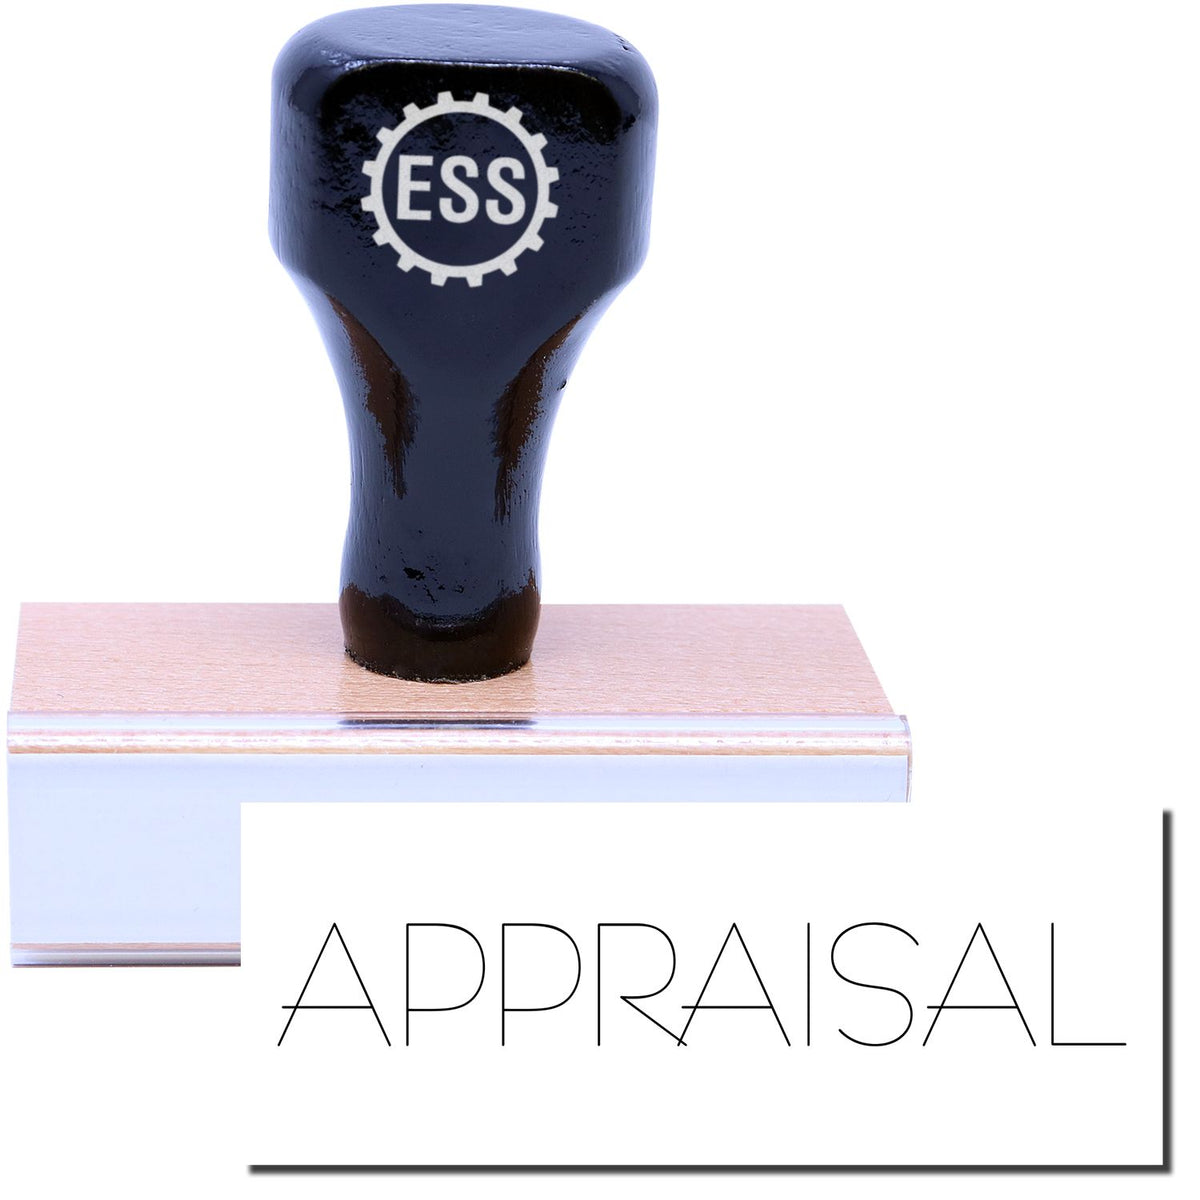 A stock office rubber stamp with a stamped image showing how the text &quot;APPRAISAL&quot; is displayed after stamping.